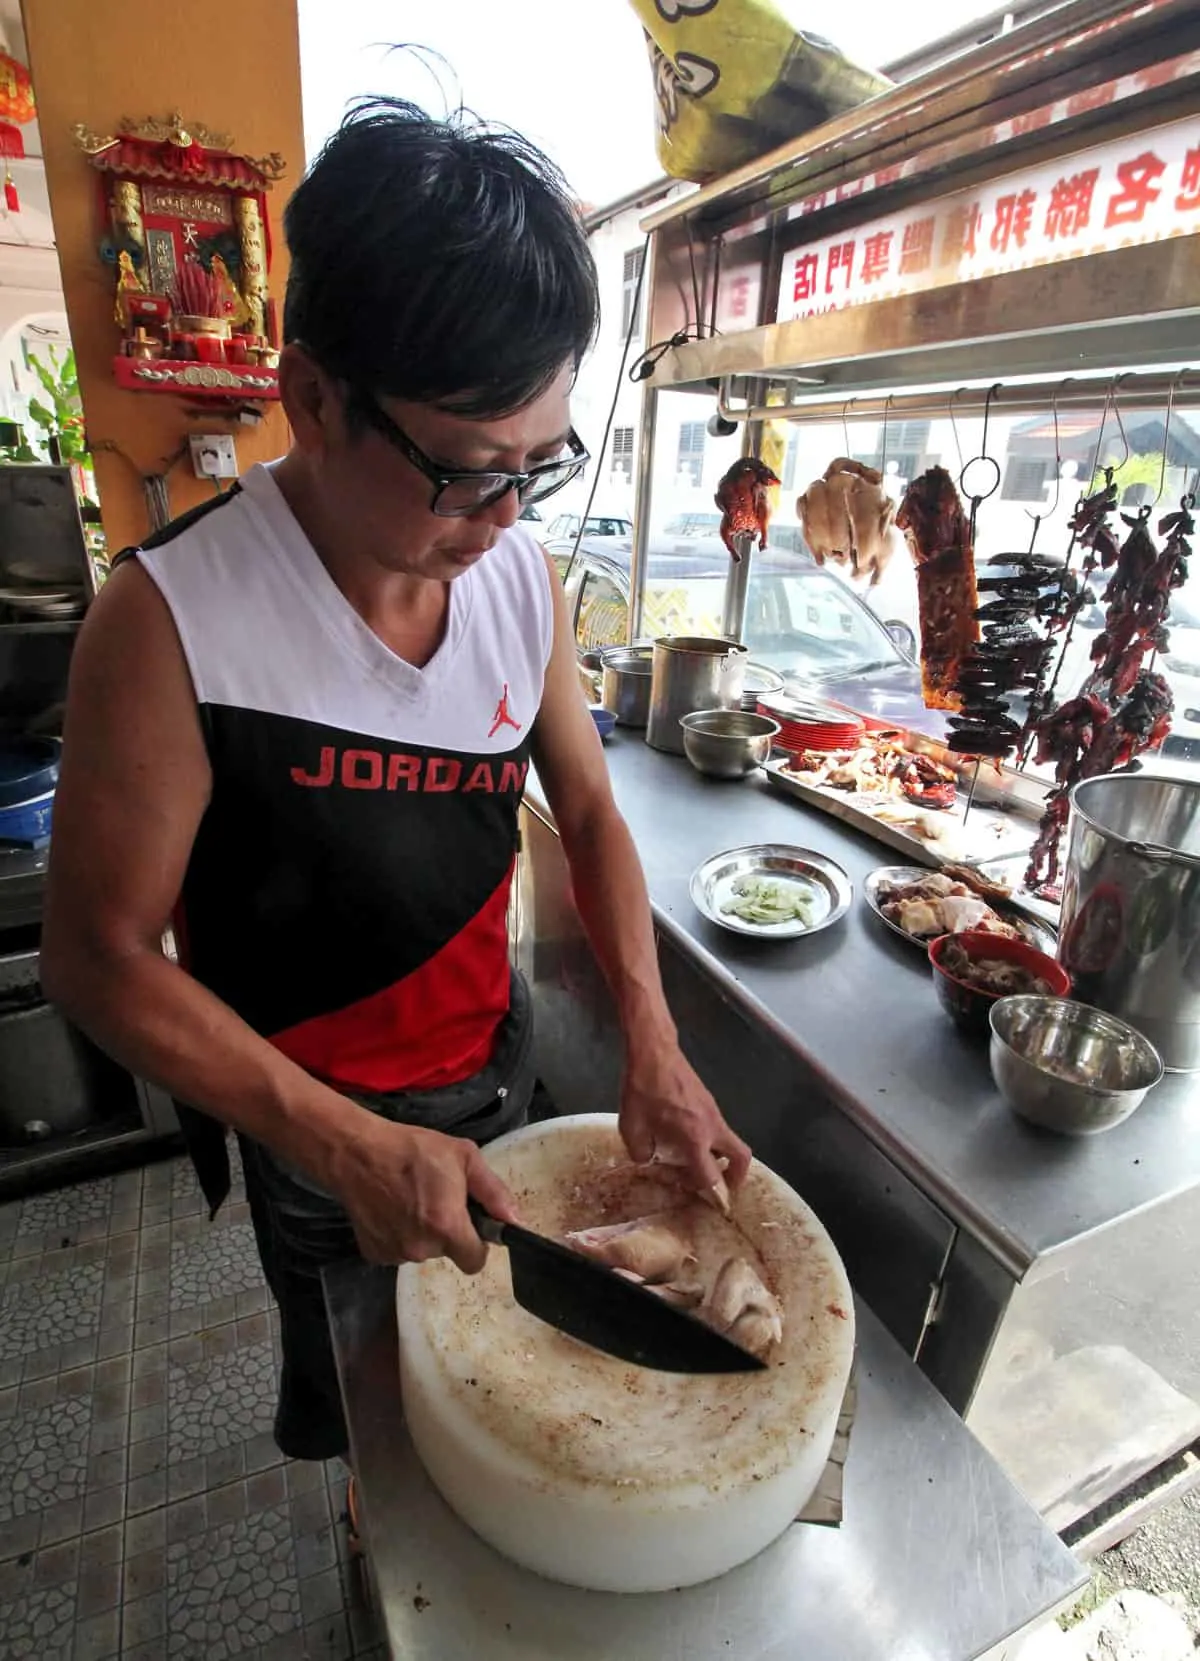 Chopping chicken at First Famous Federal Restaurant in Penang, Malaysia